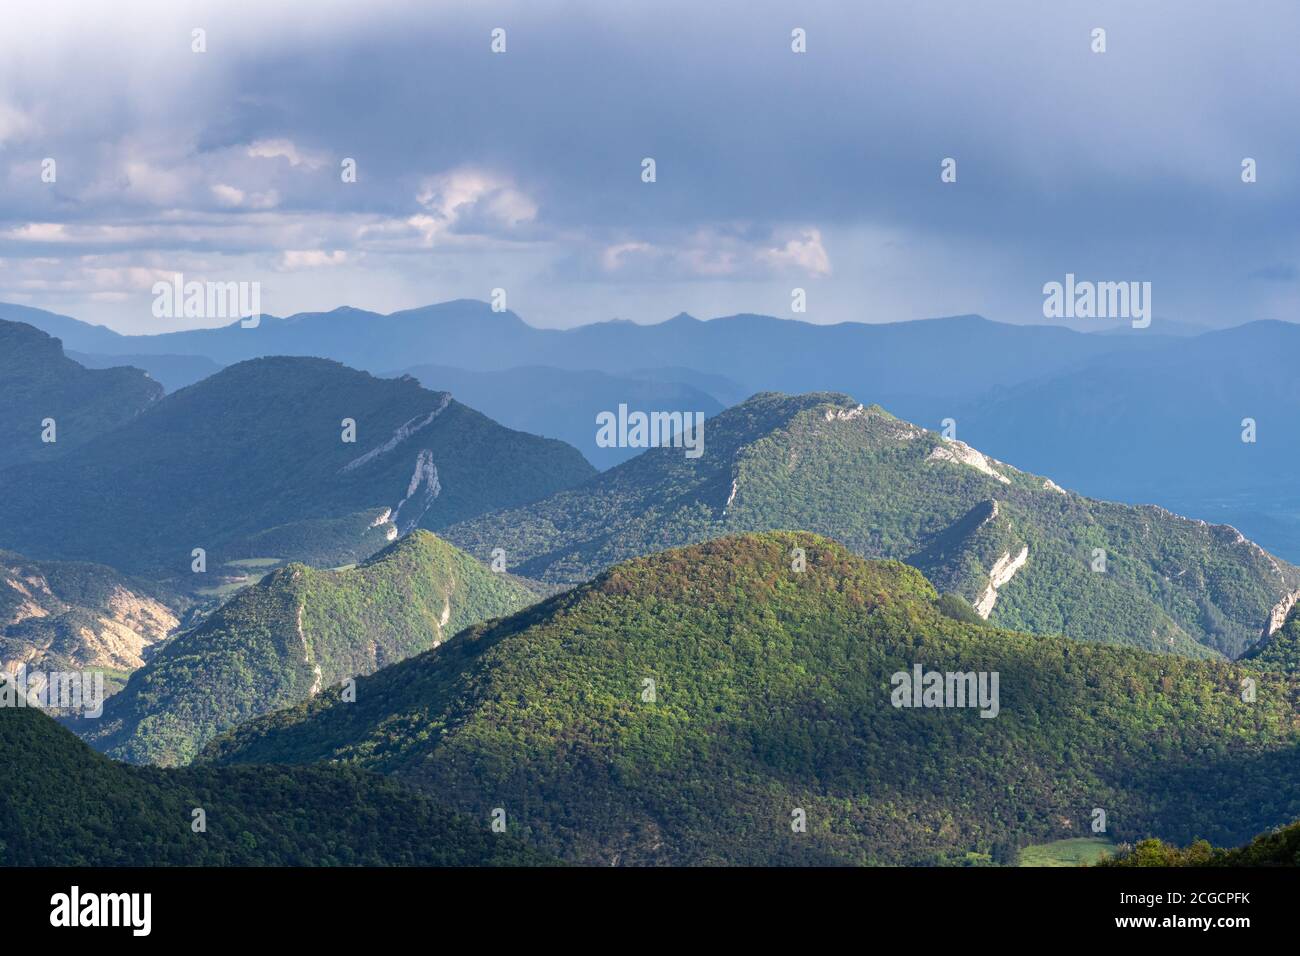 French landscape - Vercors. Panoramic view over the peaks (Col de Rousset) of the Vercors in France. Stock Photo